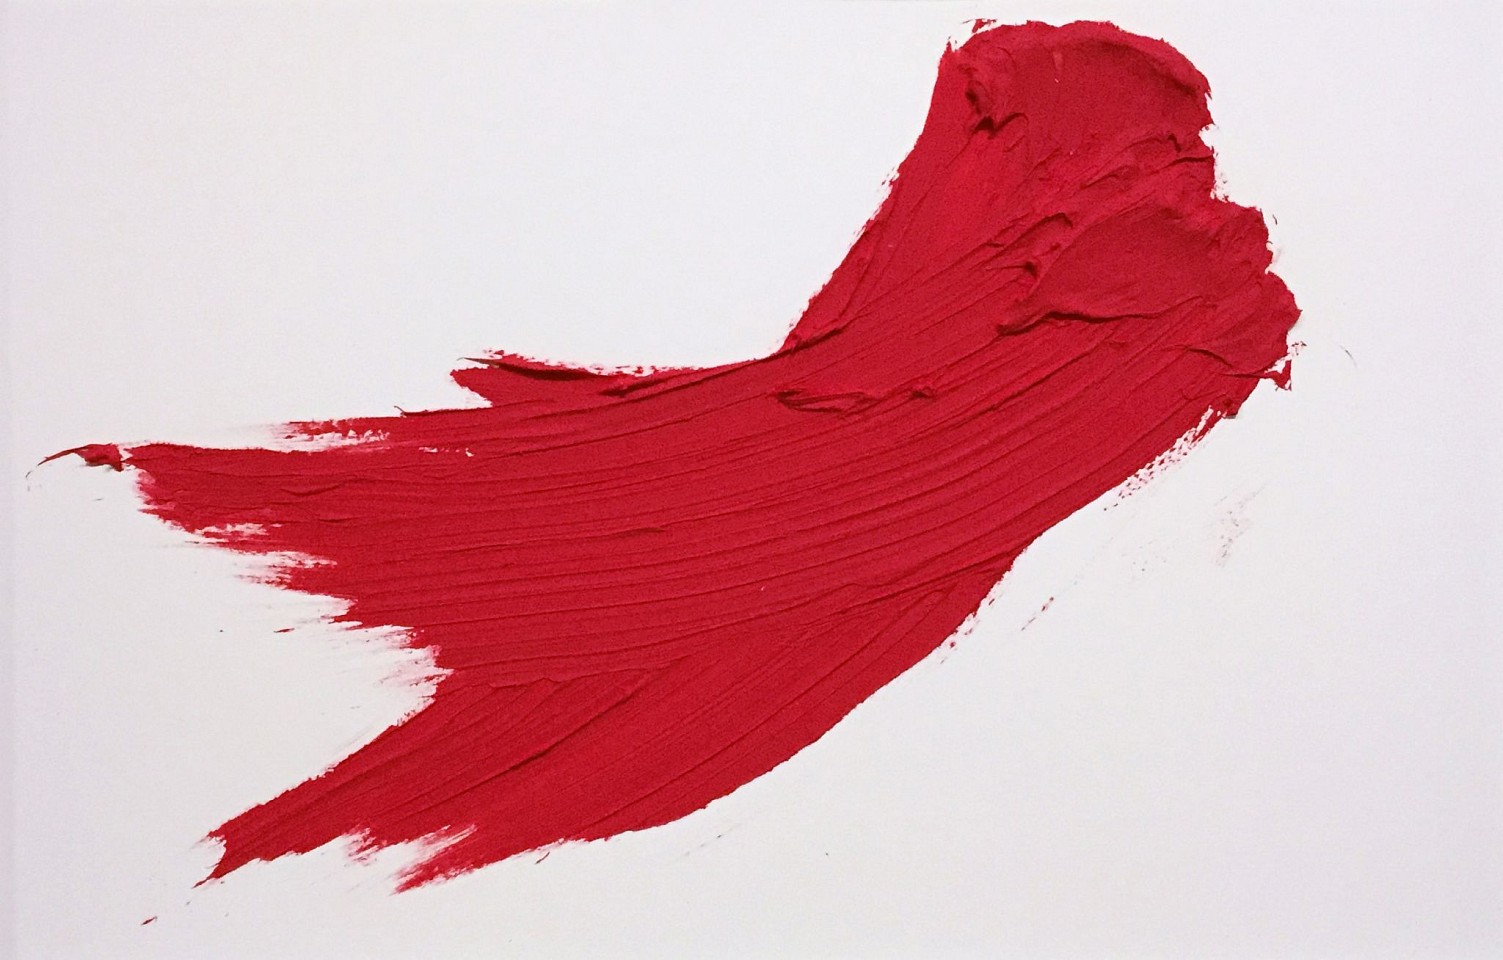 Donald Martiny, Untitled, 2017
polymer and pigment on paper, 22.75 x 30.5 in. paper, 30 x 38 in. frame
Red framed
MART0045